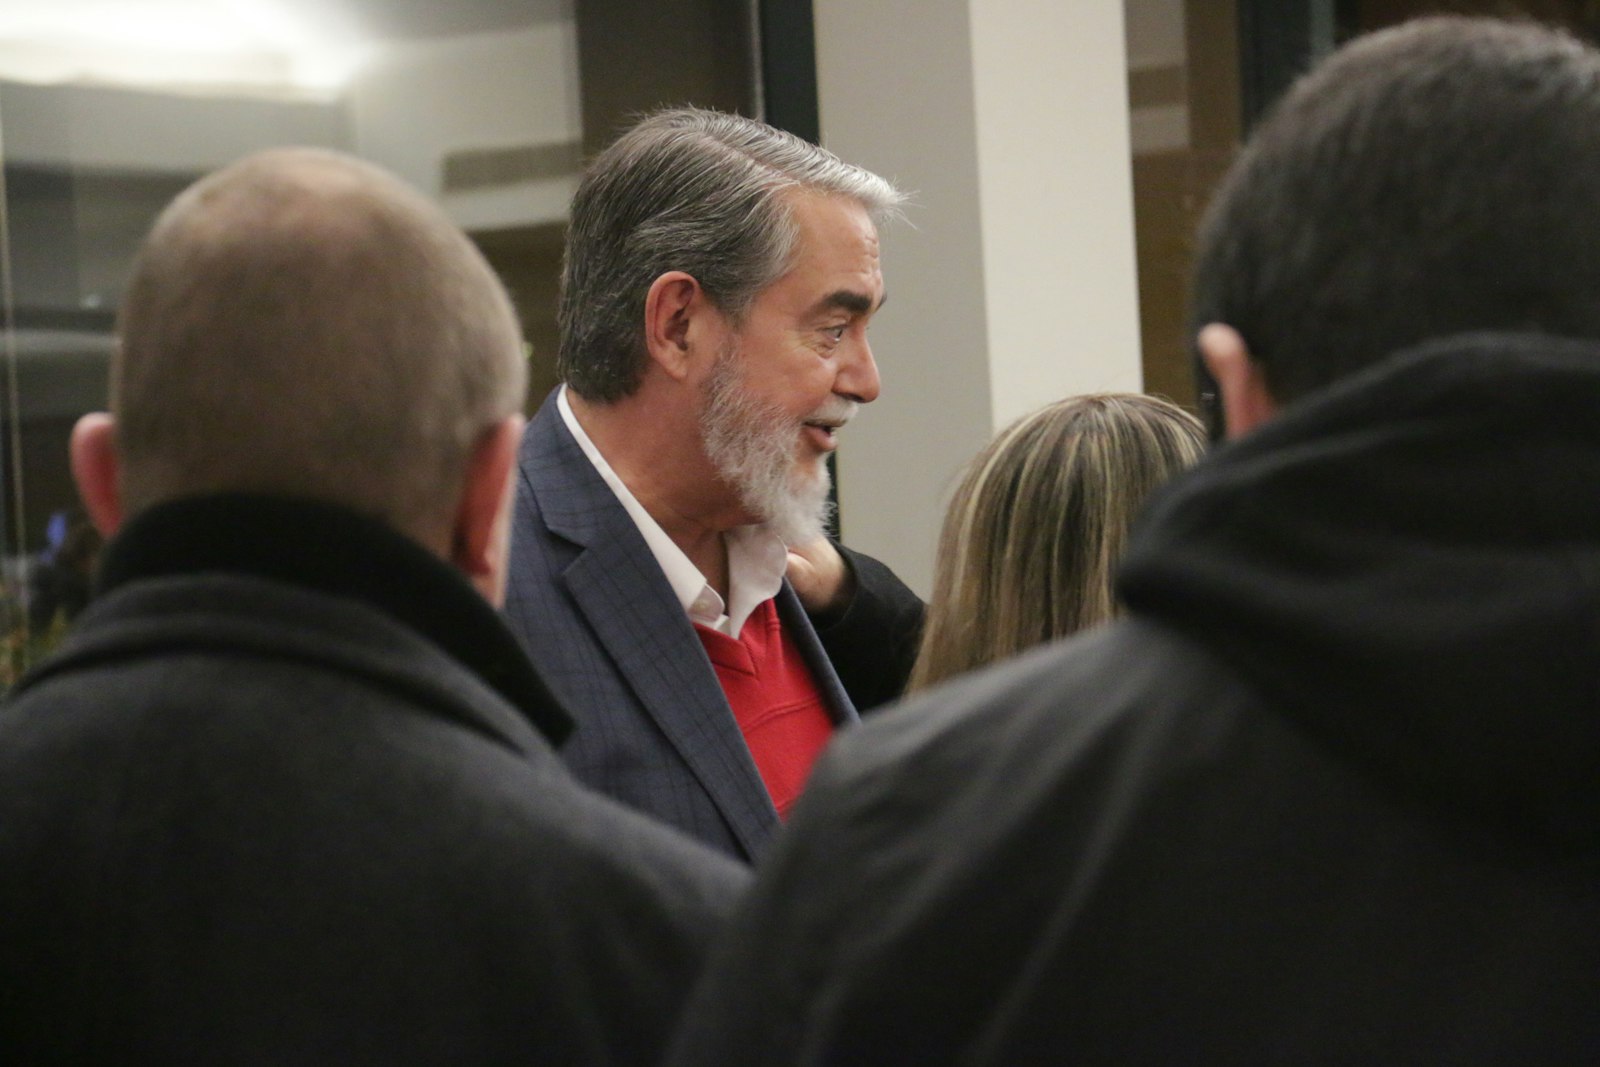 Originally a Presbyterian minister, Dr. Scott Hahn joined the Catholic Church in 1986 while studying for his Ph.D. at Marquette University, recalling how a Mass he witness on campus reminded him of the ancient liturgy and practices of the early Christians.